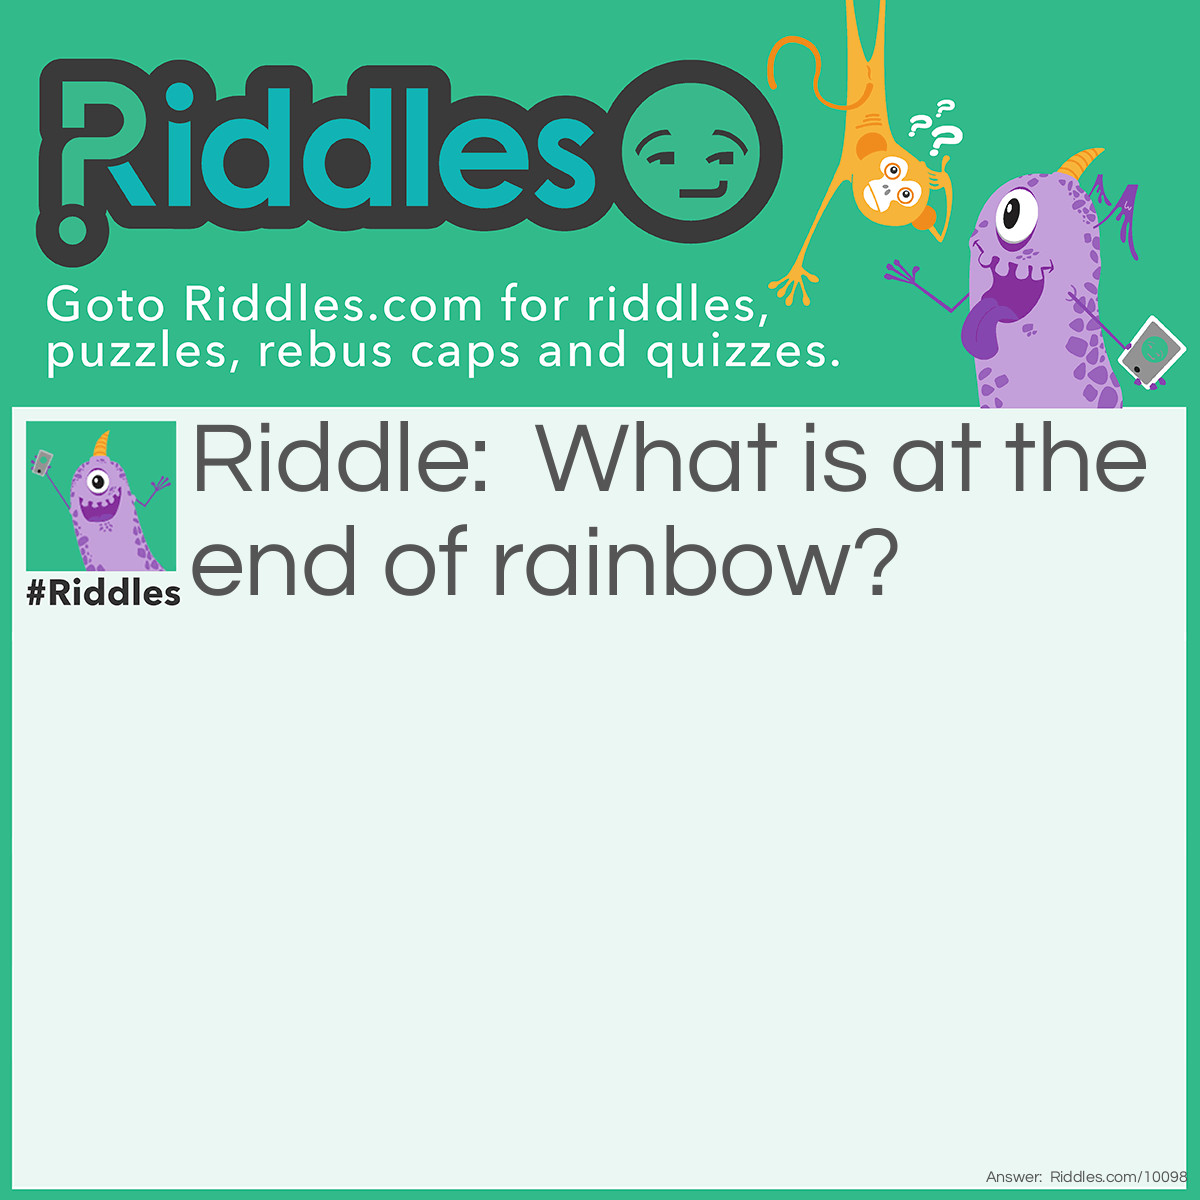 Riddle: What is at the end of rainbow? Answer: the letter W.